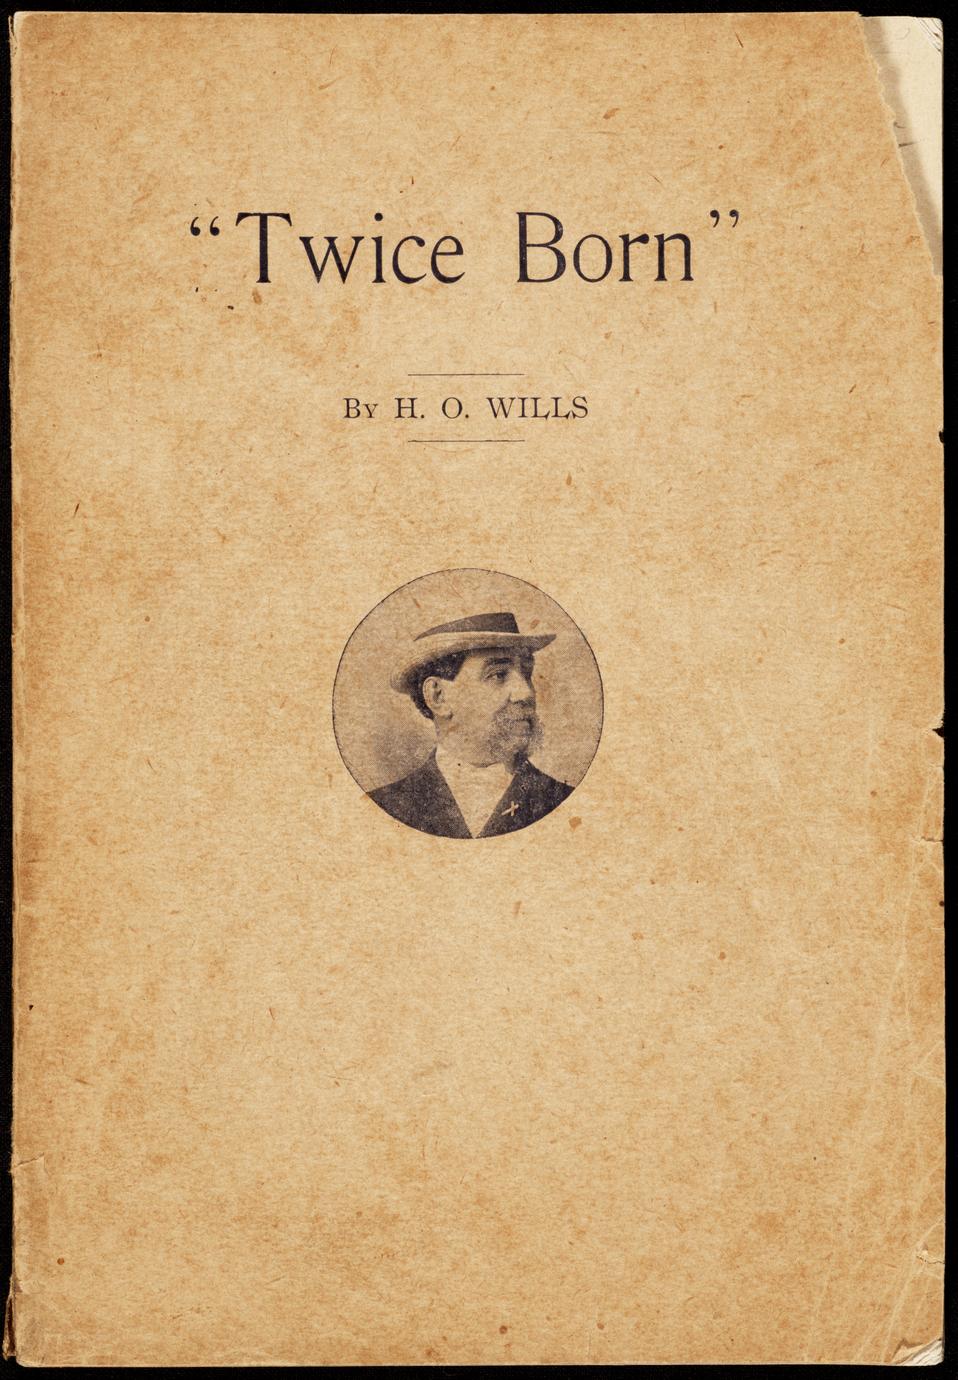 Twice born ; or, The two lives of Henry O. Wills, evangelist (1 of 2)